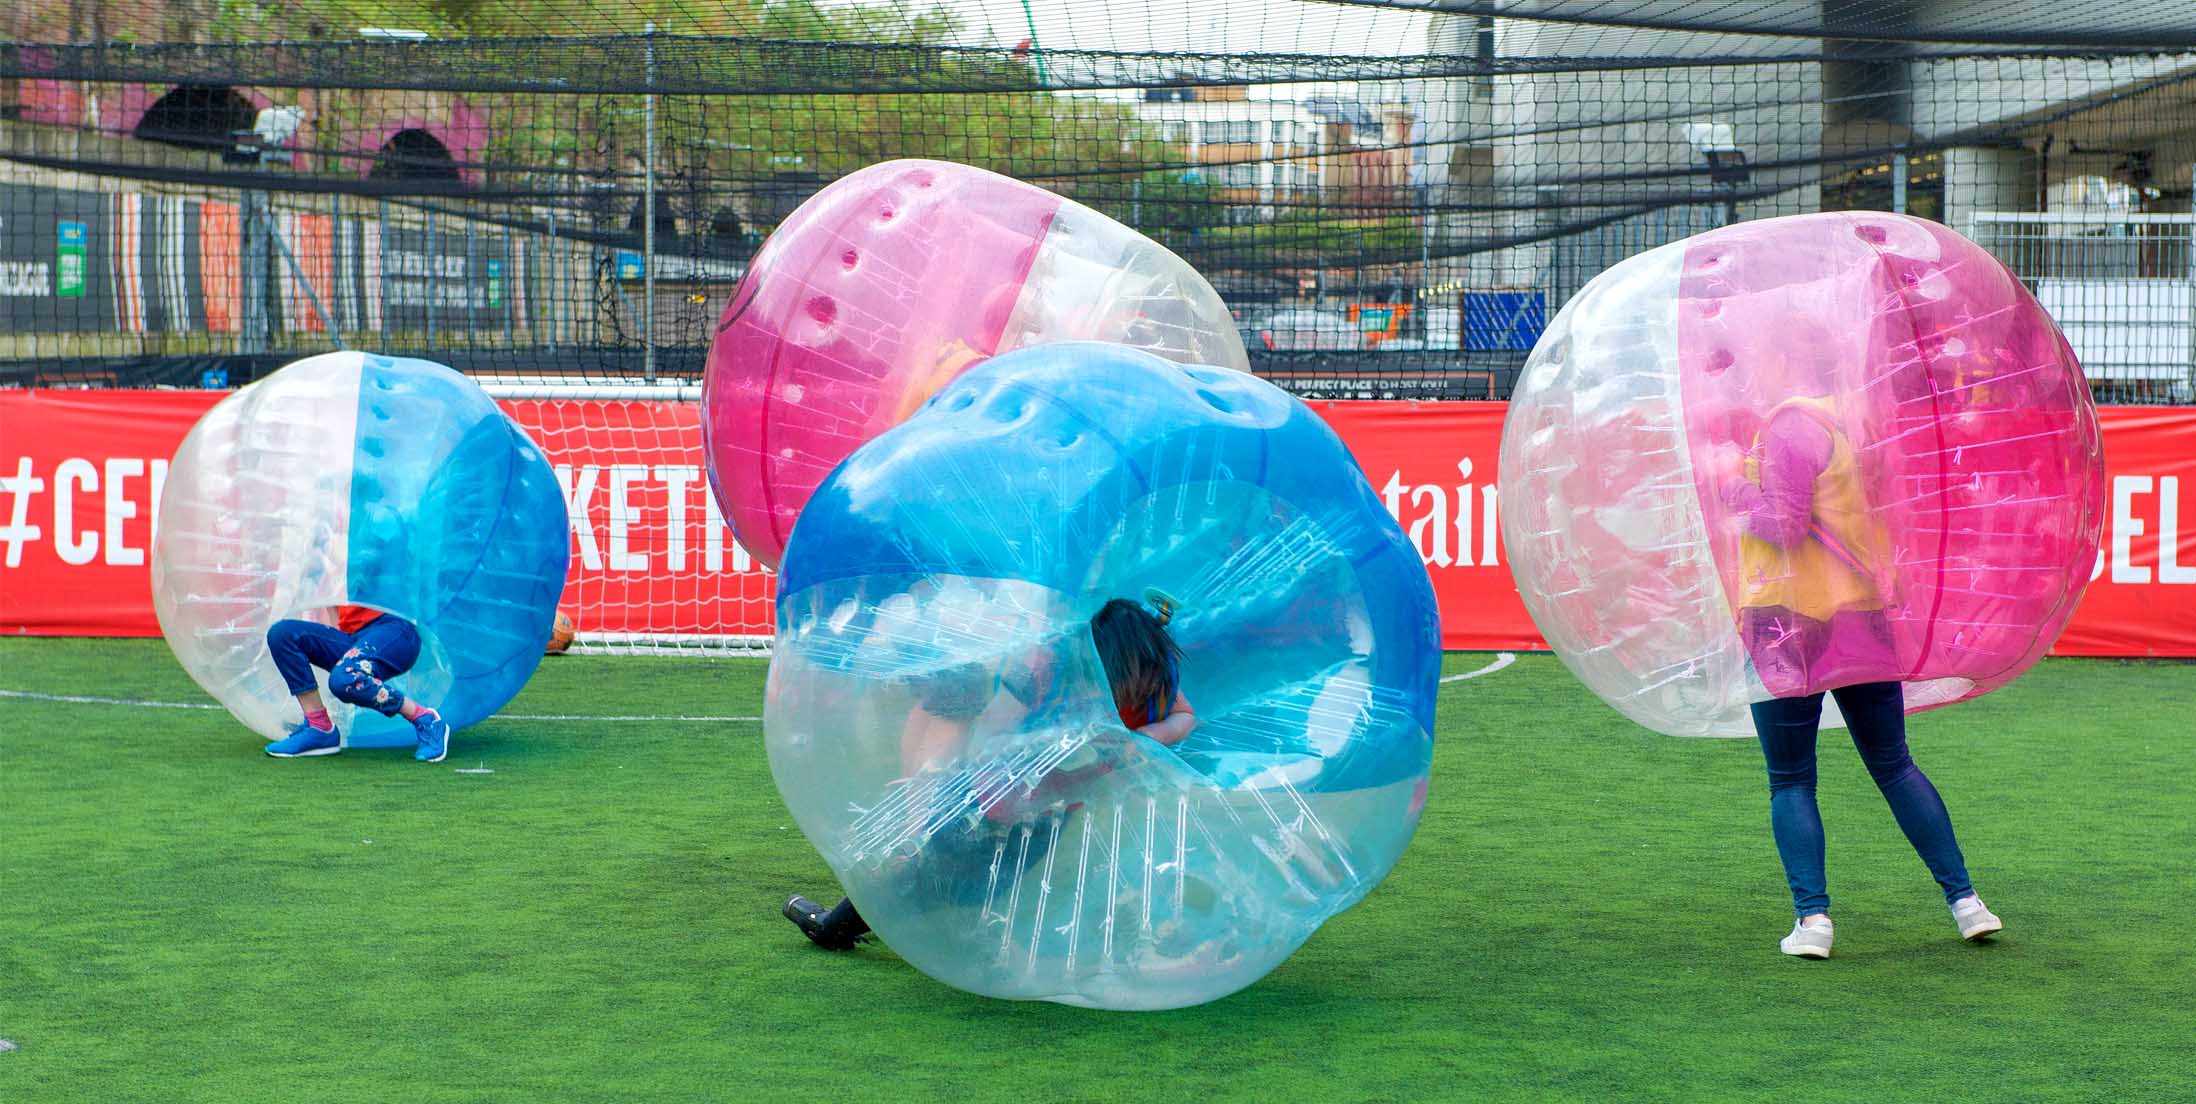 Top Stag Do Ideas & Activities - Bubble Football